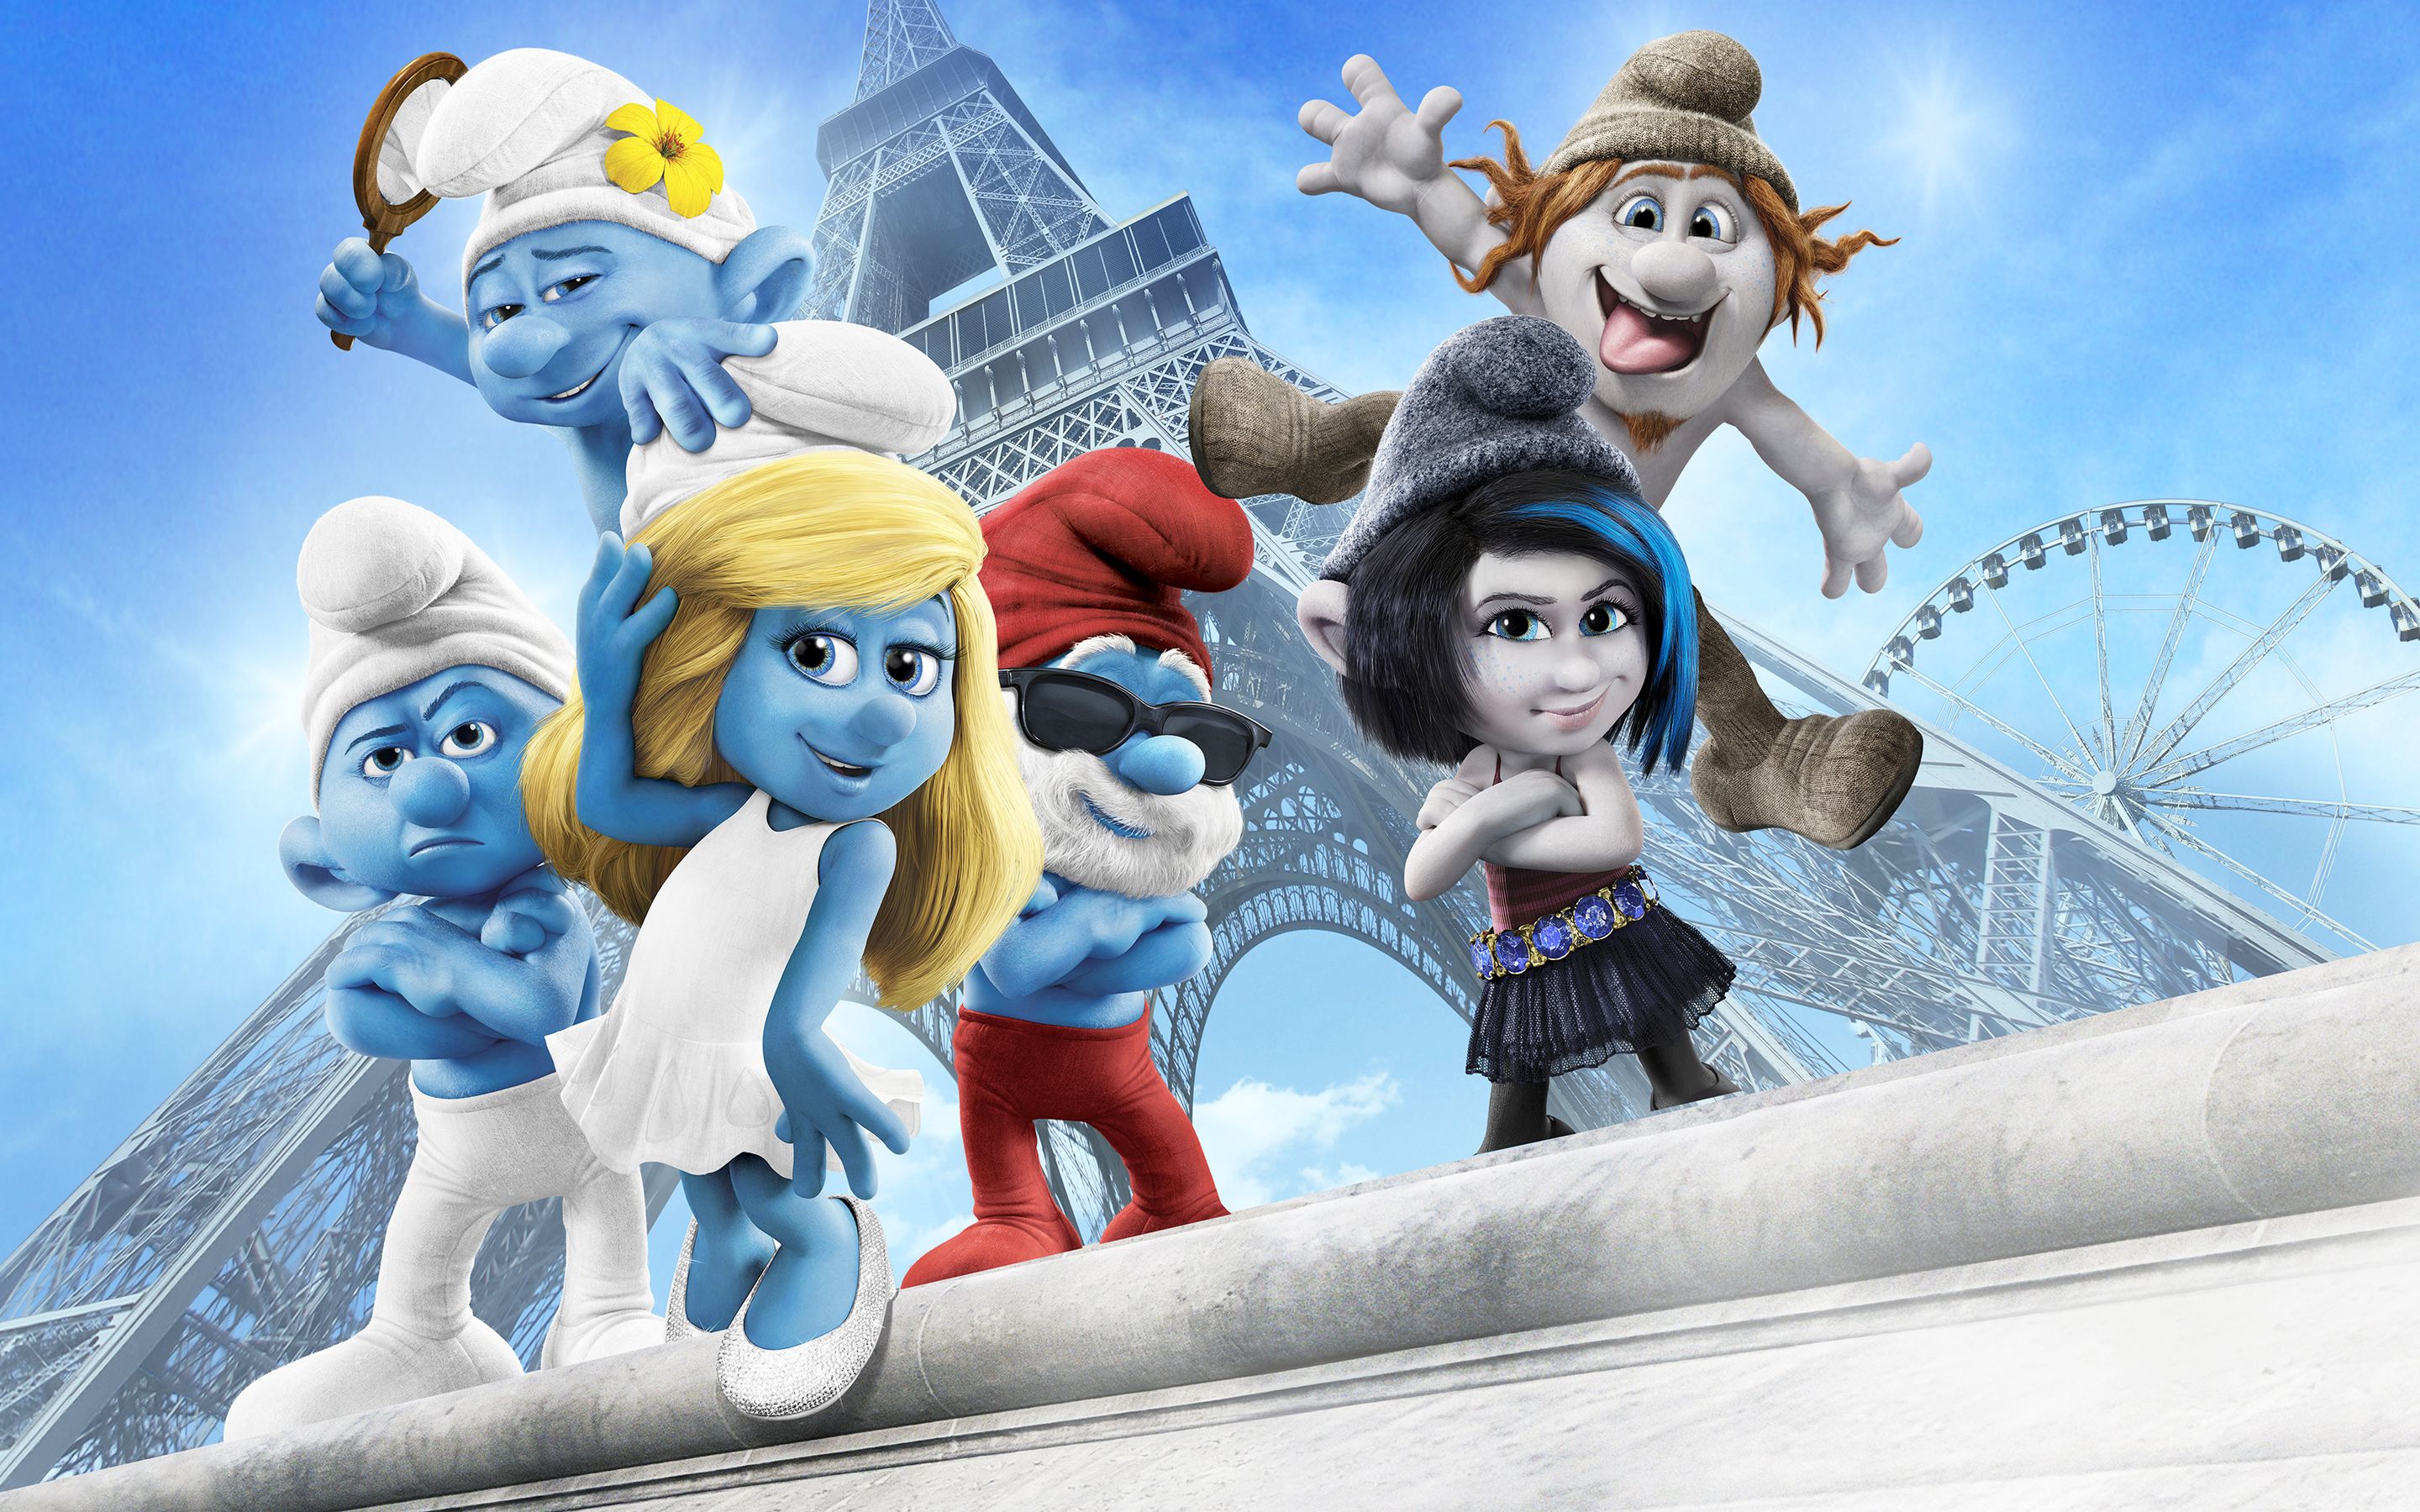 The Smurfs 2 Movie Wallpapers HD Backgrounds